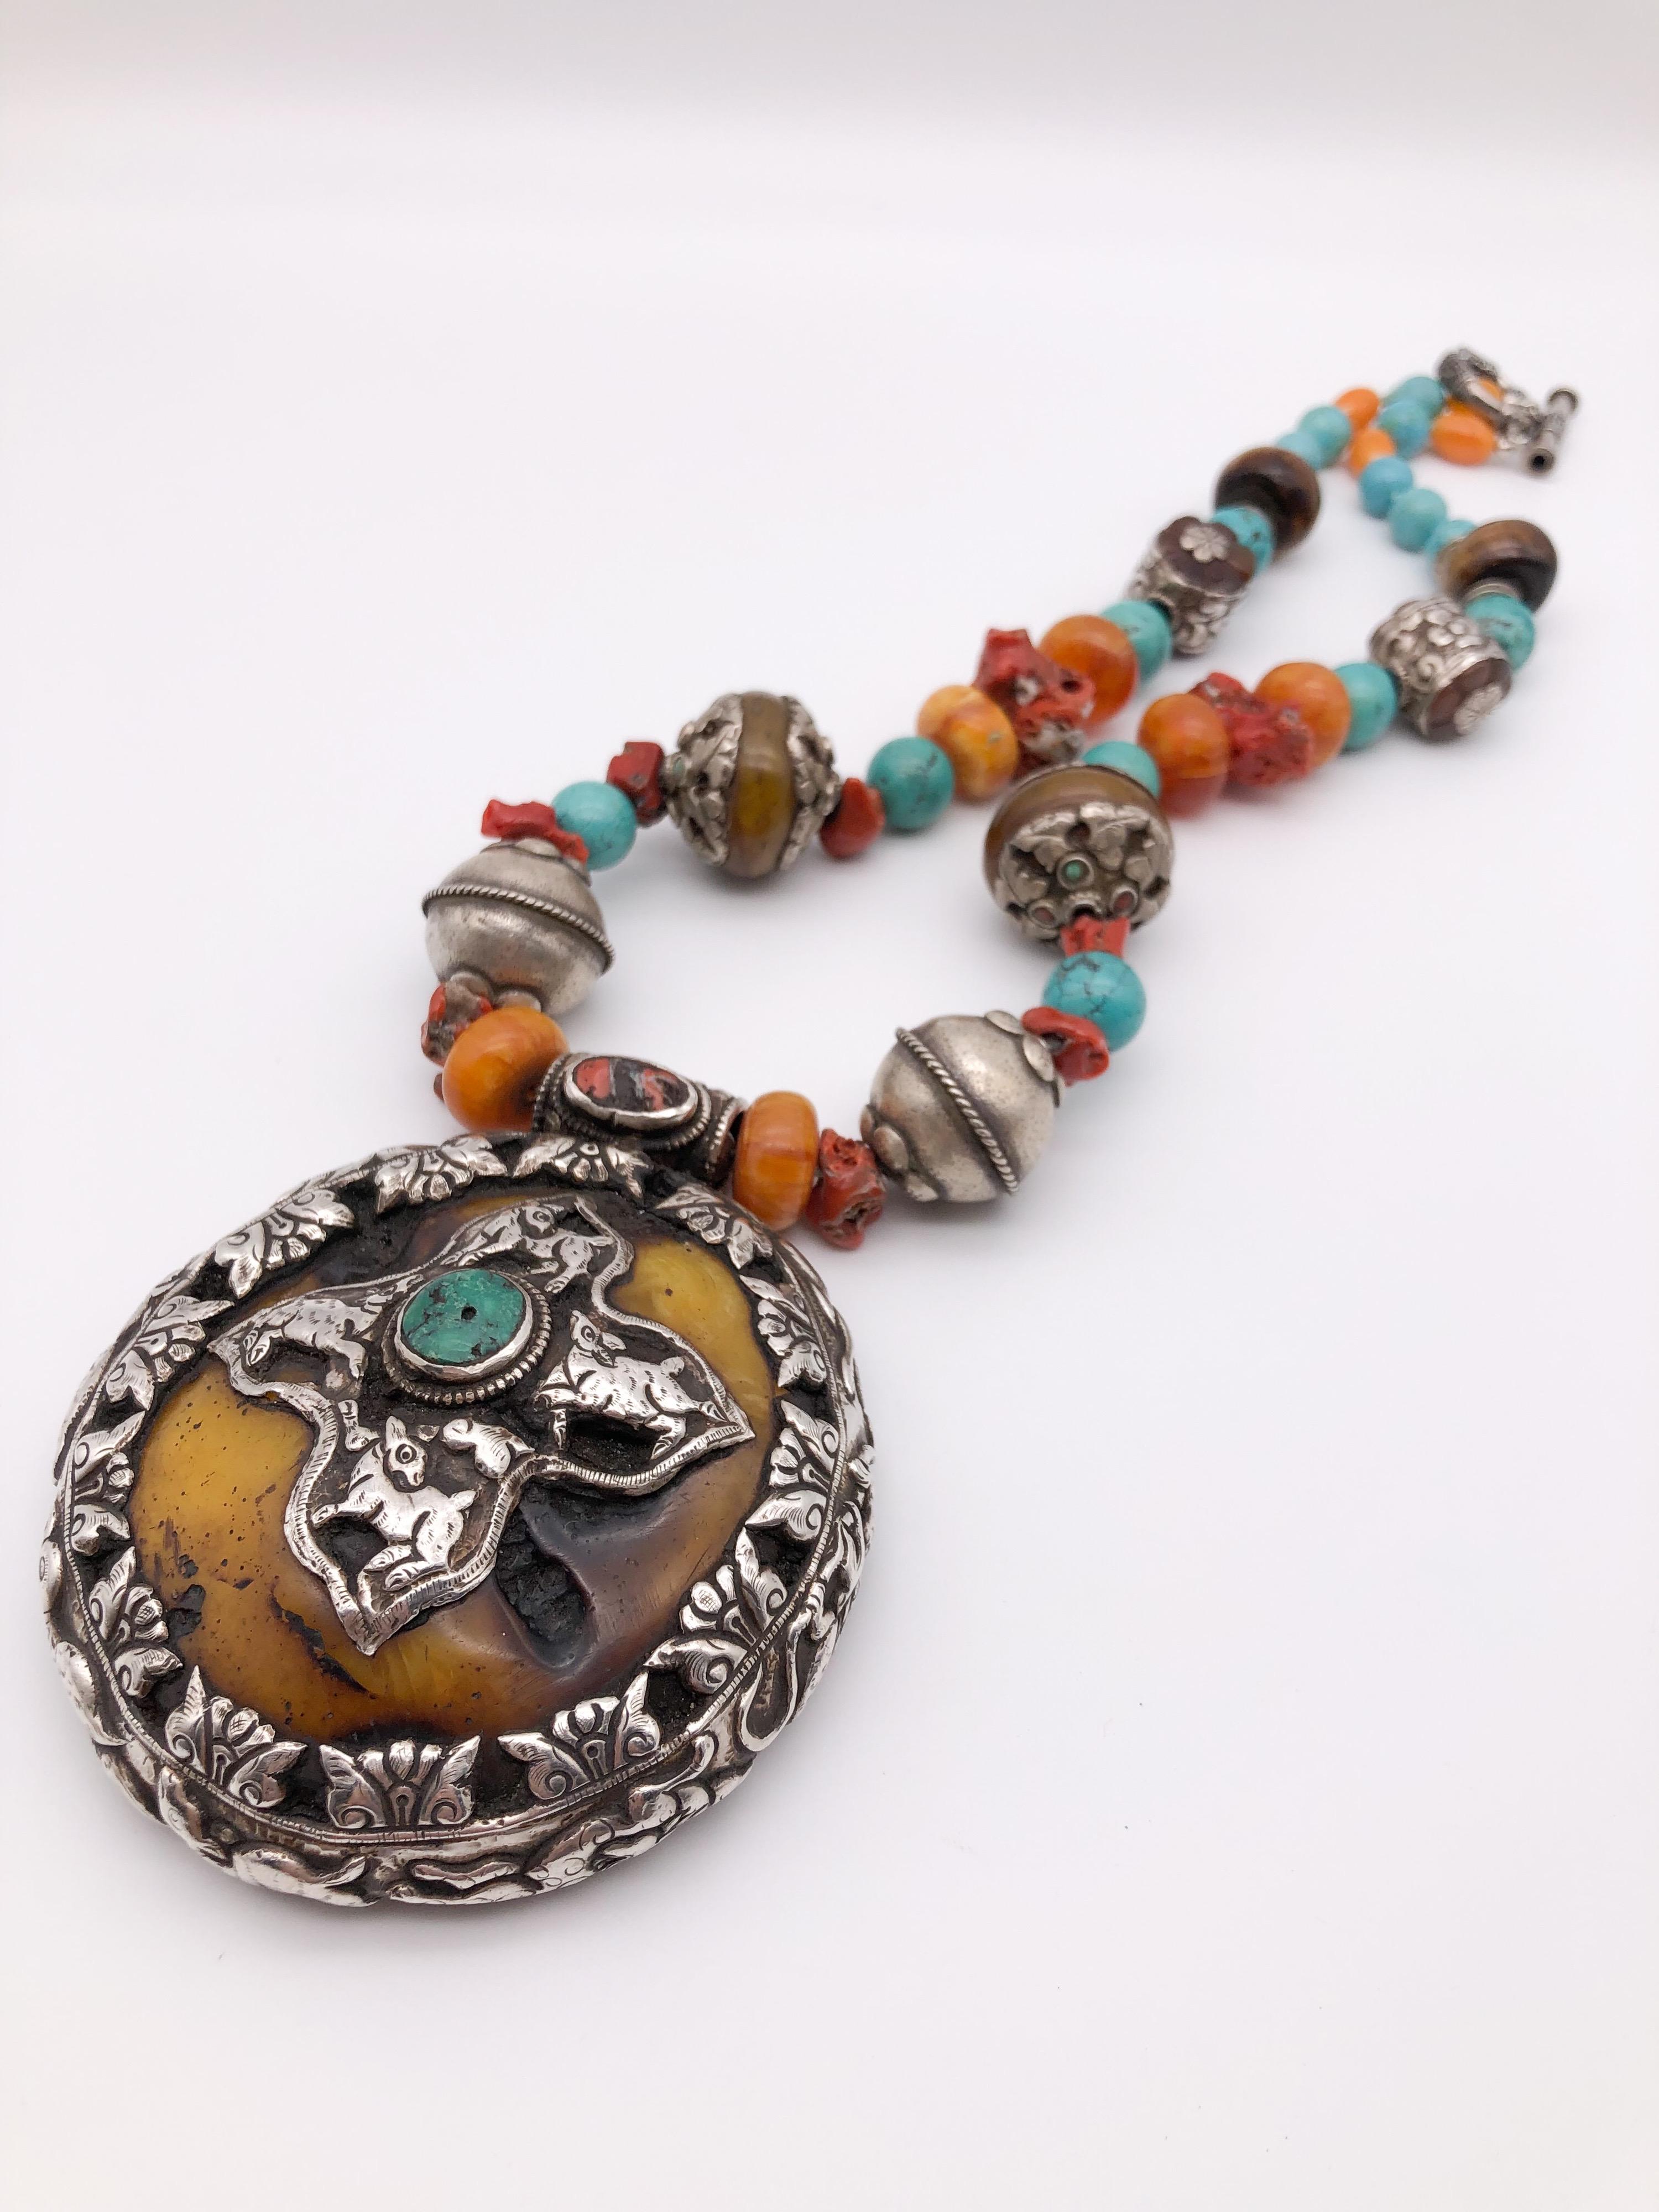 A.Jeschel Magnificent necklace with Tibetan Bold Sterling Silver Pendant For Sale 5